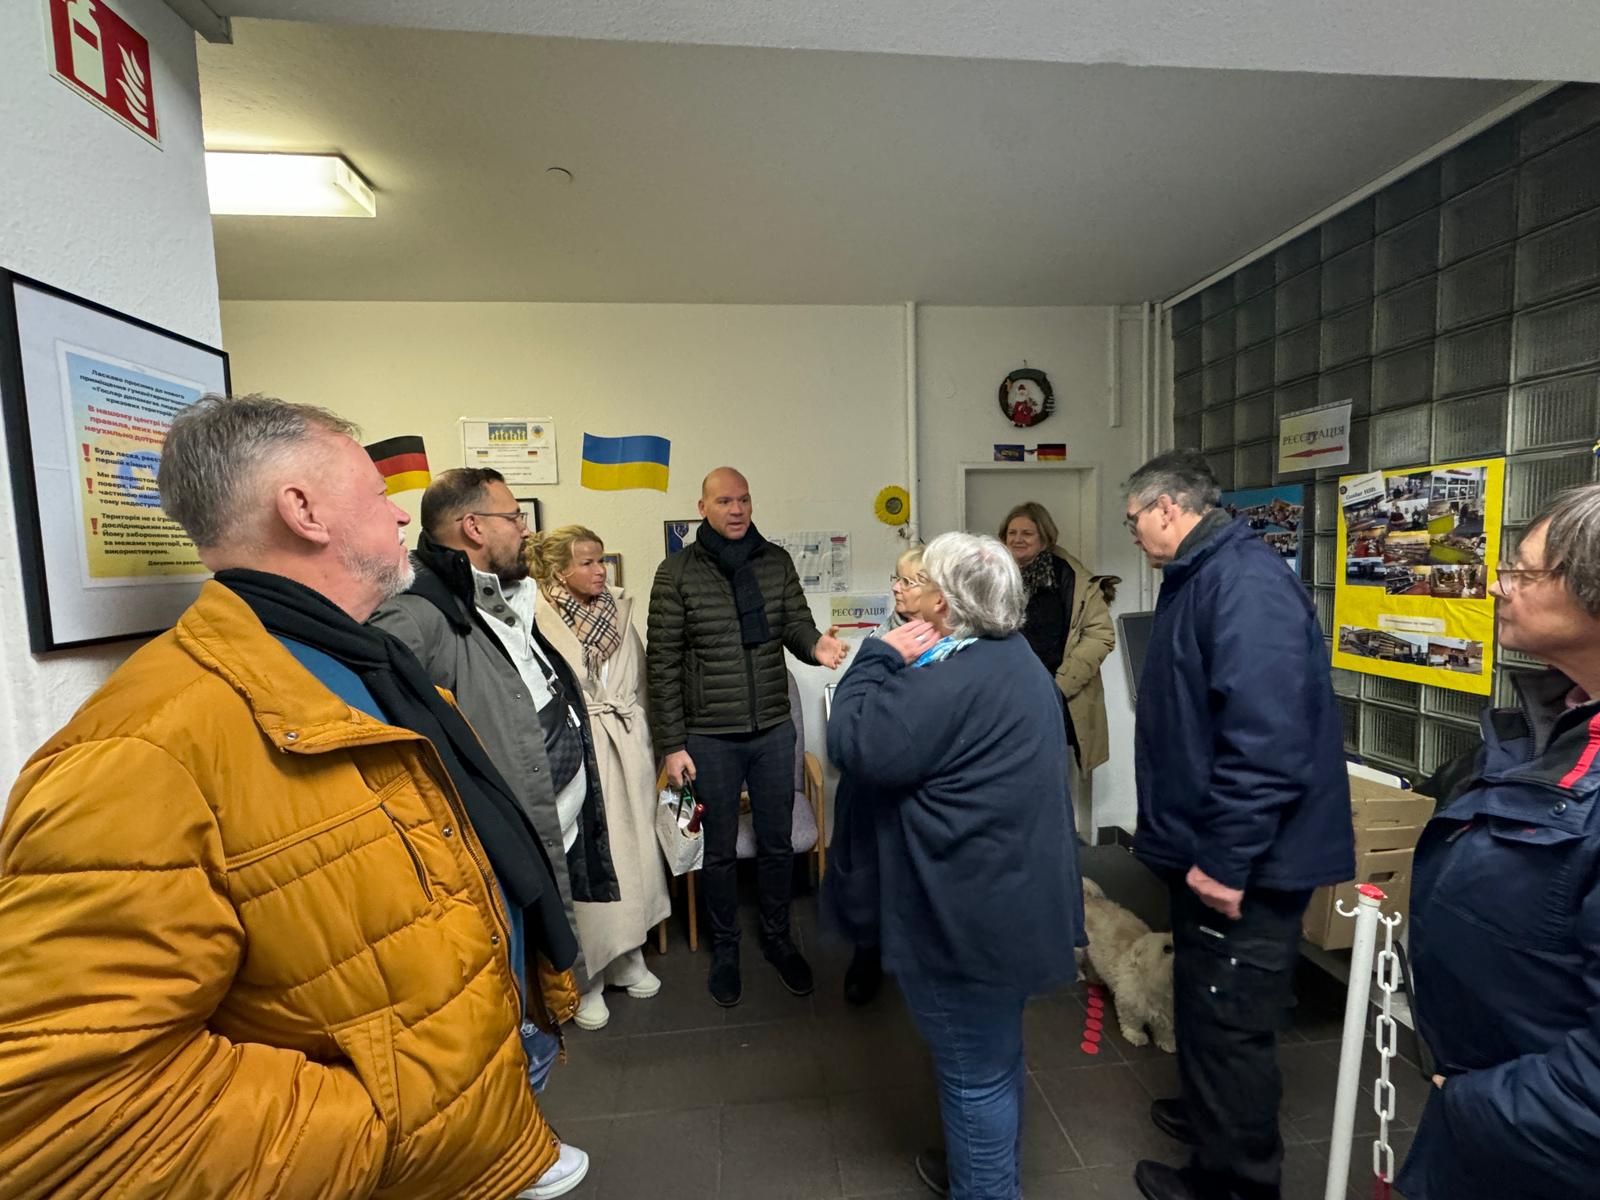 Visit of the mayor and the SPD parliamentary group of the city of Goslar in the new donation center